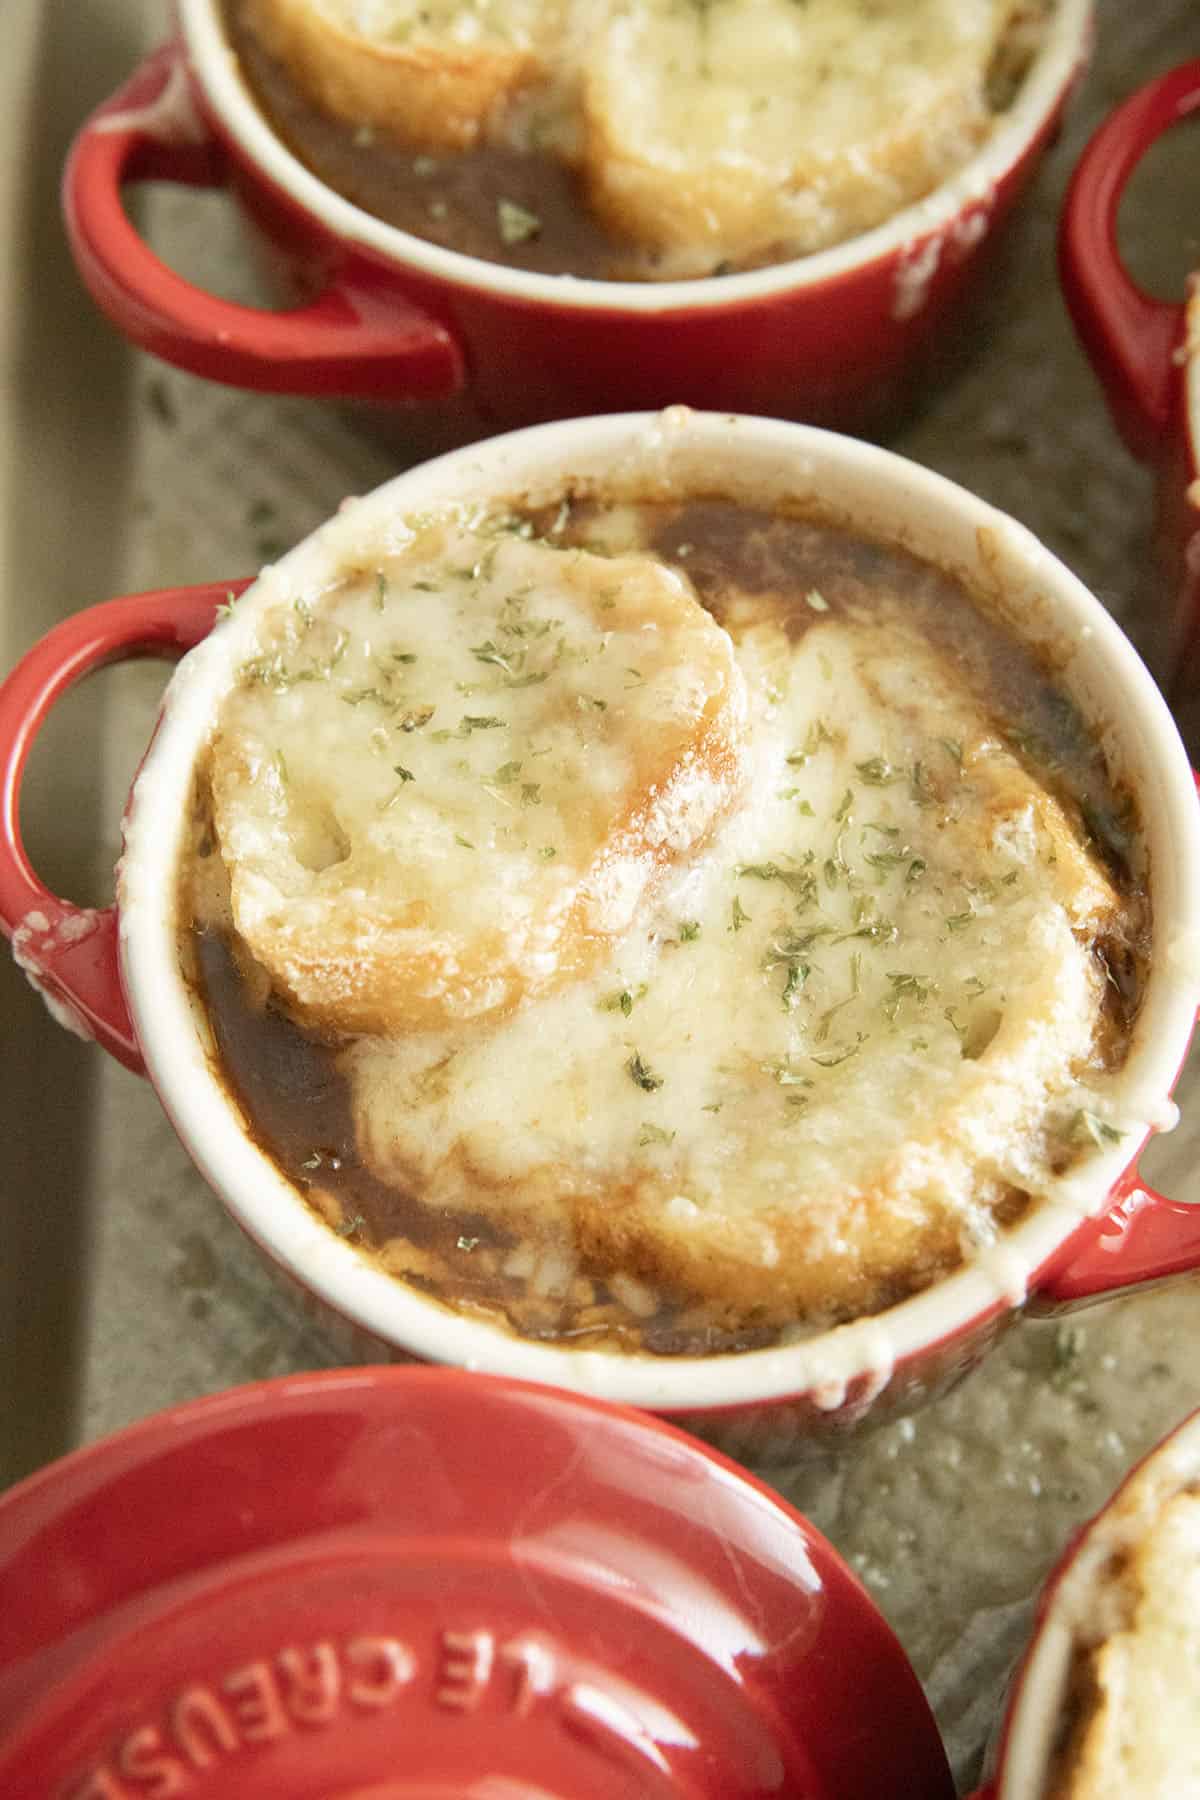 french onion soup in a bowl